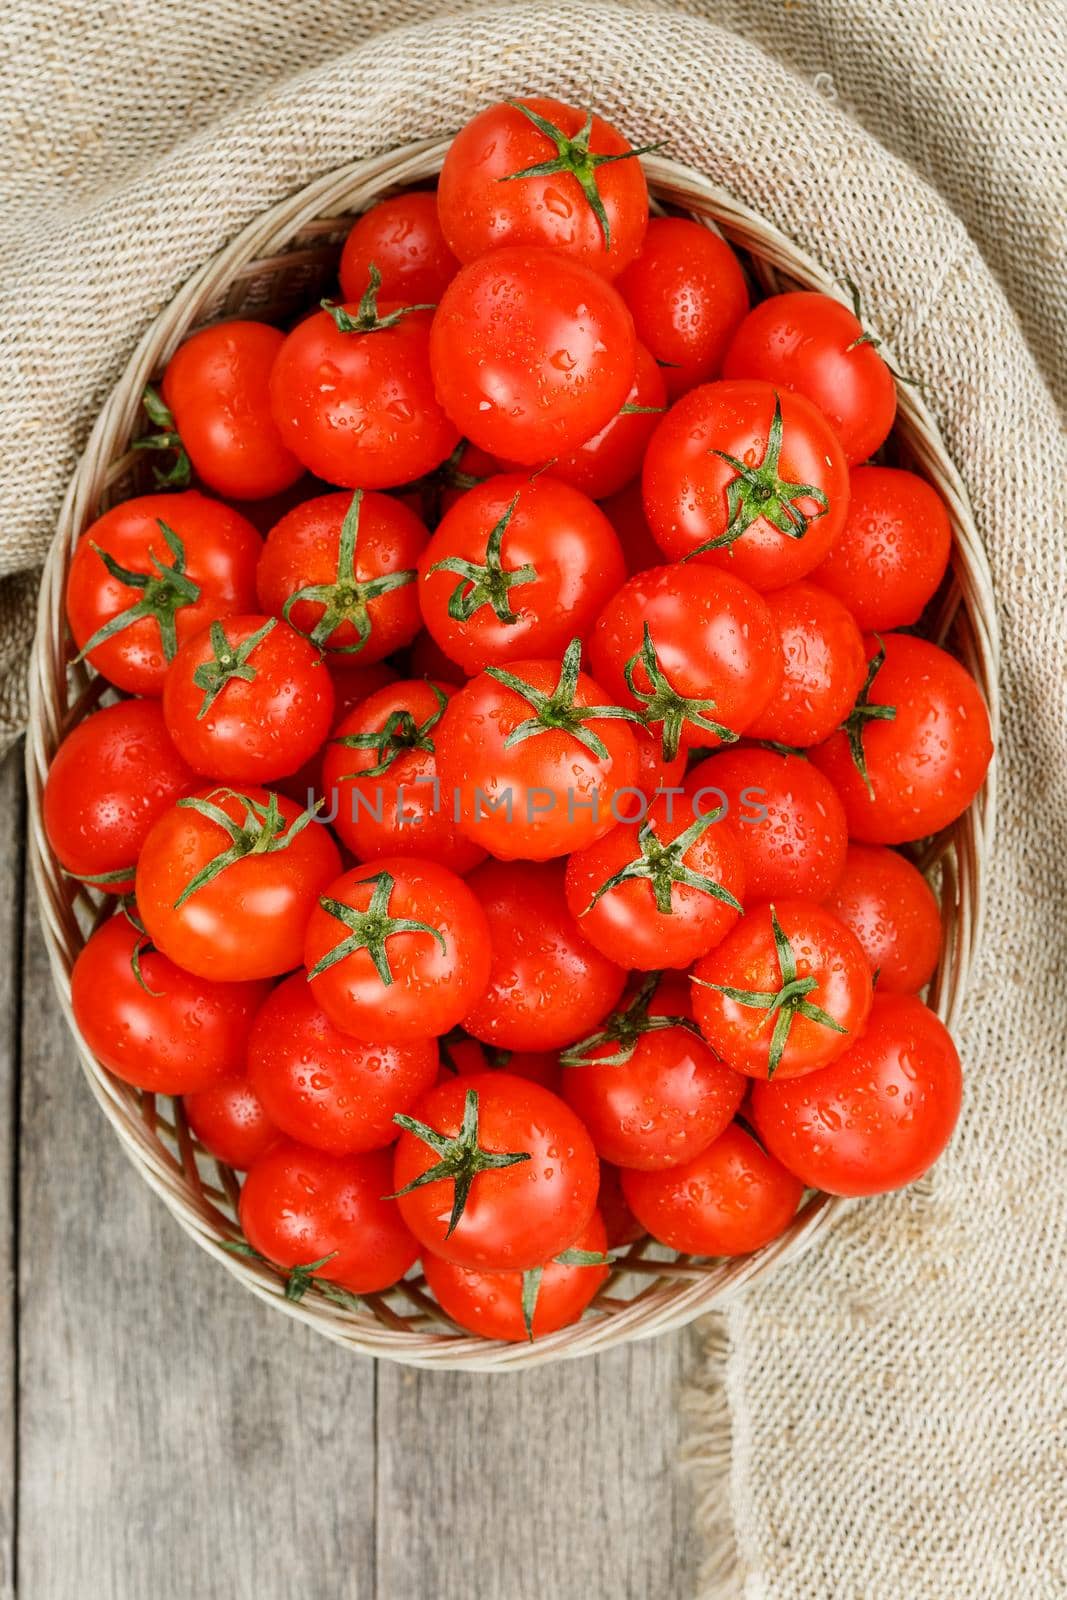 Small red tomatoes in a wicker basket on an old wooden table. Ripe and juicy cherry and burlap cloth, Terevan style country style View from above